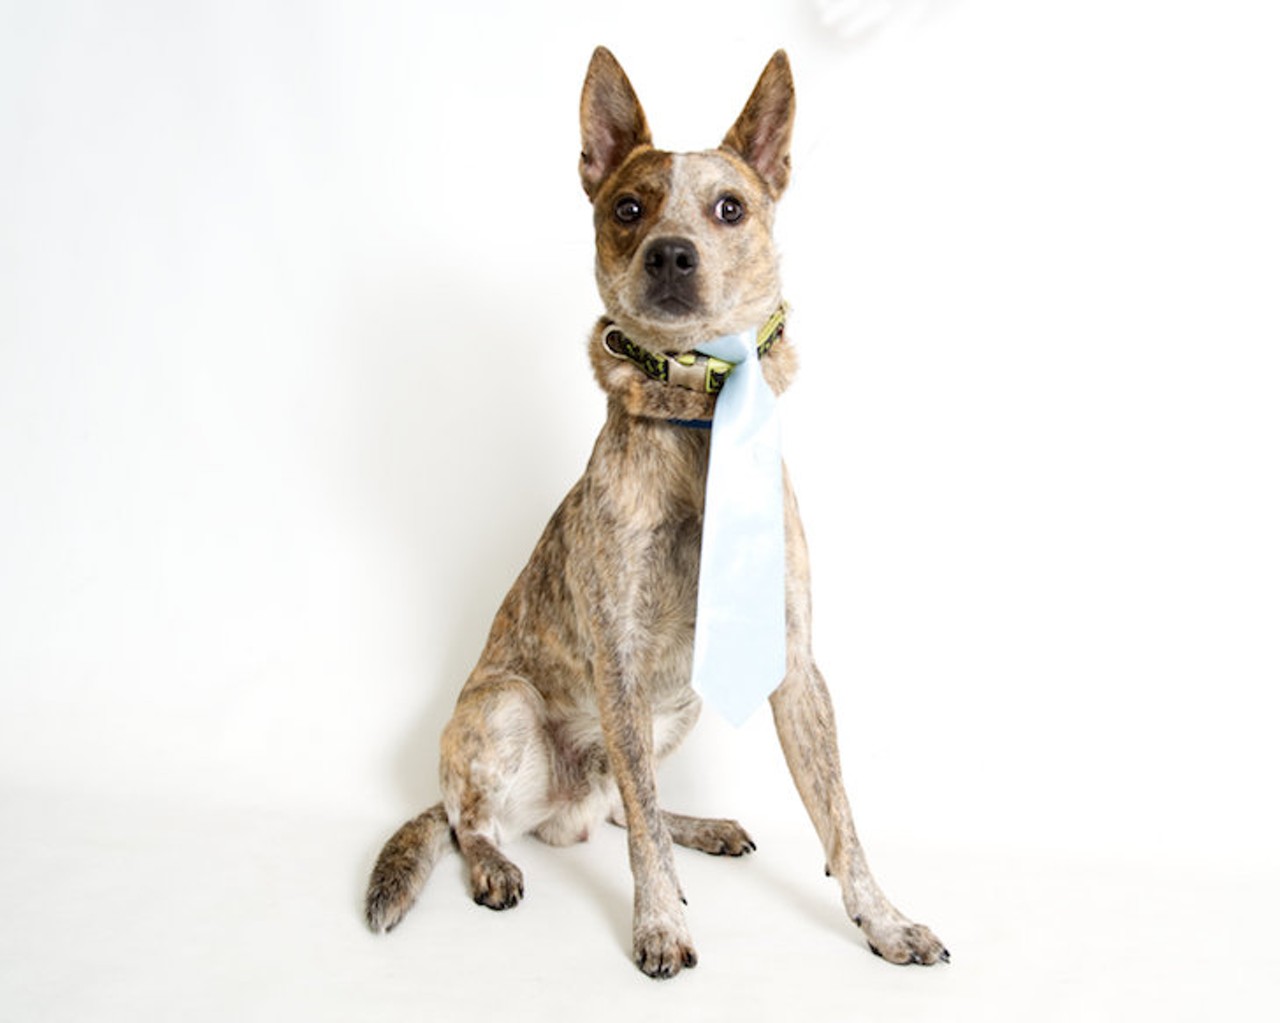 25 adoptable dogs looking for a new human ASAP